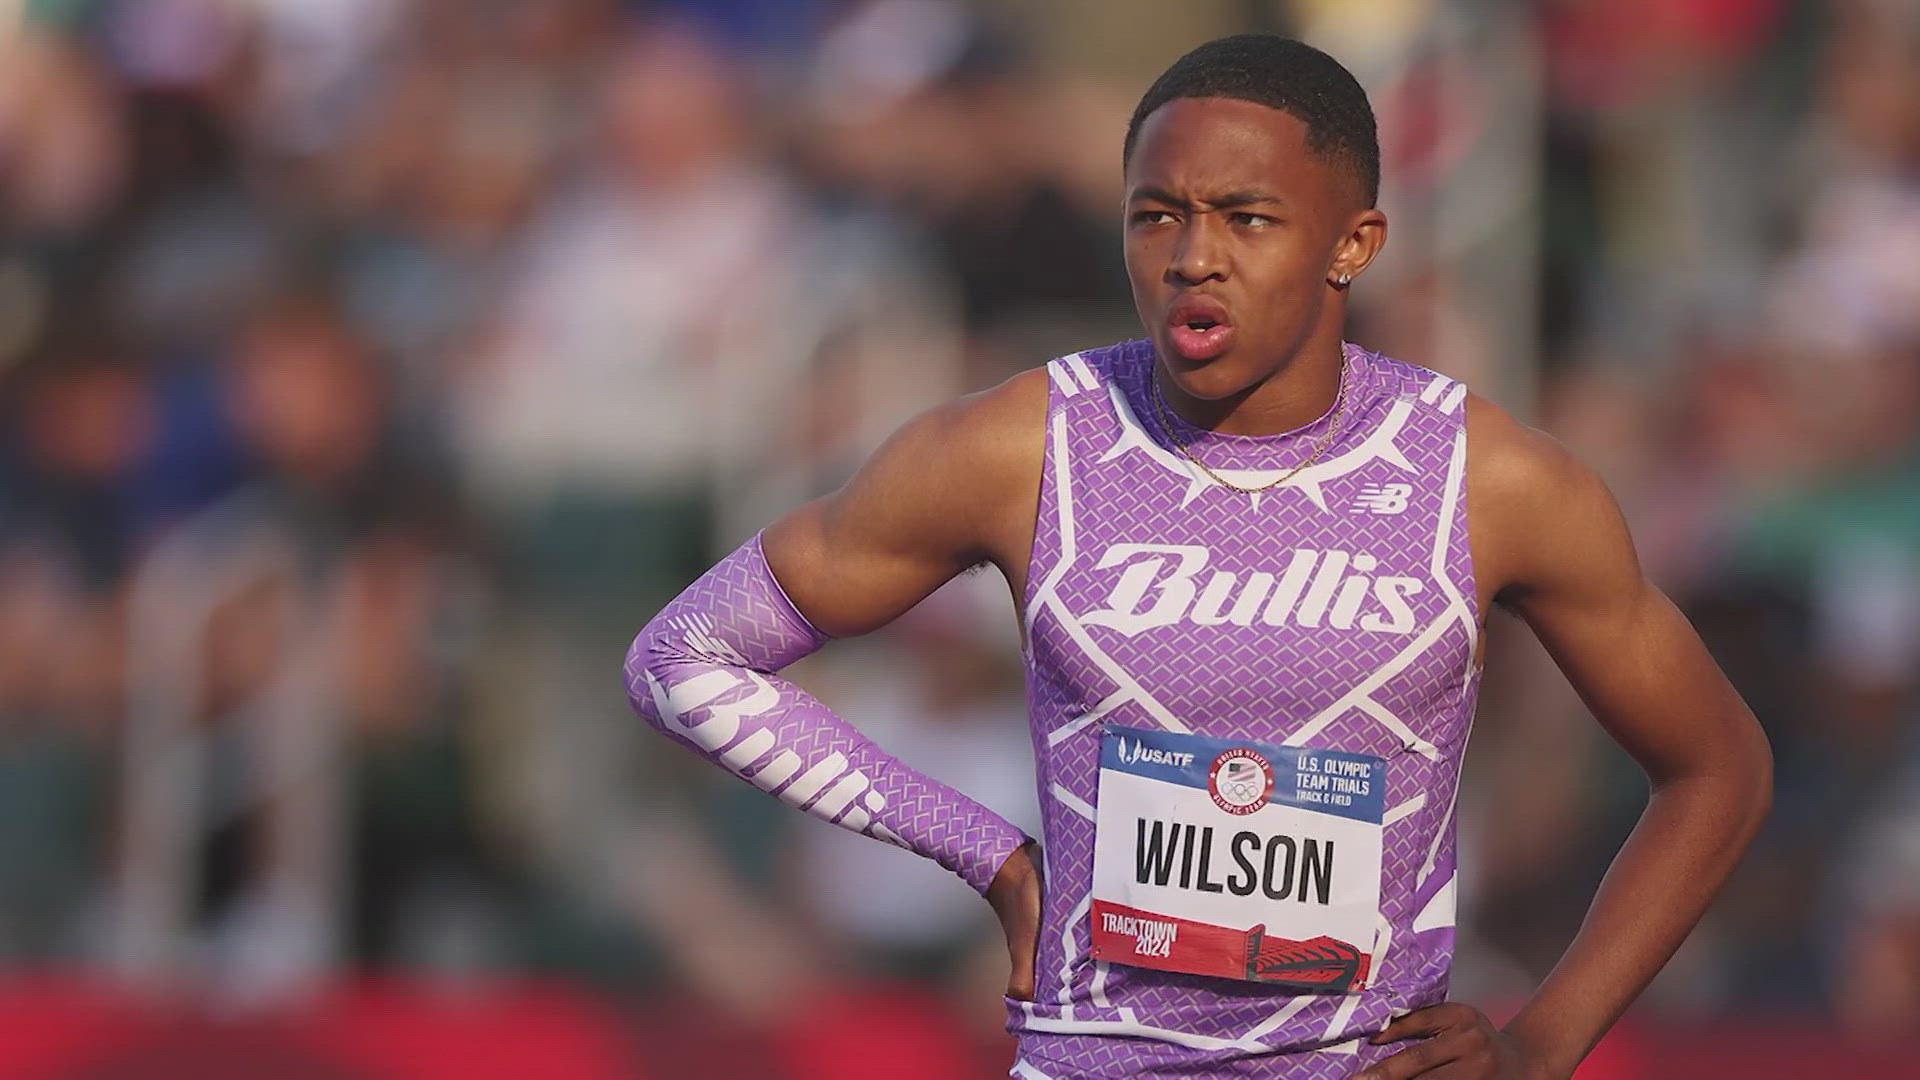 The teenager is the youngest U.S. male track and field athlete to make an Olympic team.